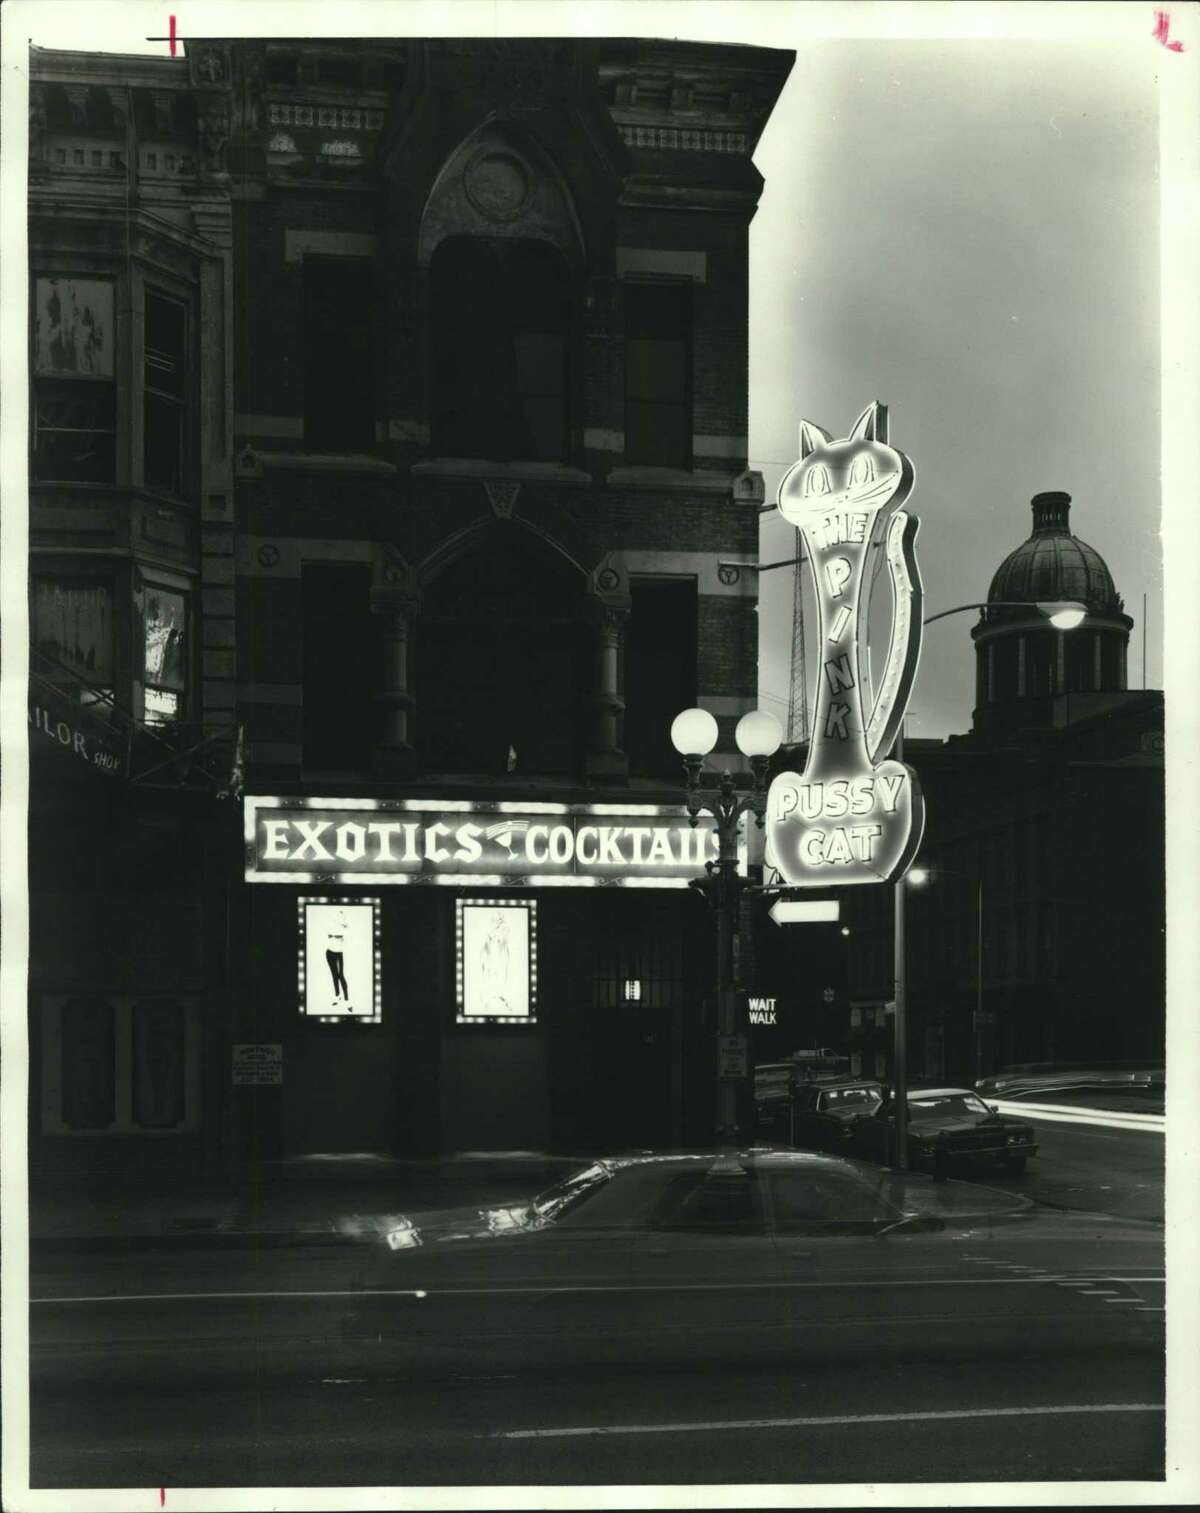 This iconic bright pink neon sign marks the Pink Pussy Cat lounge in Houston at the corner of Main and Congress avenues in 1979. The building was demolished in 1983.